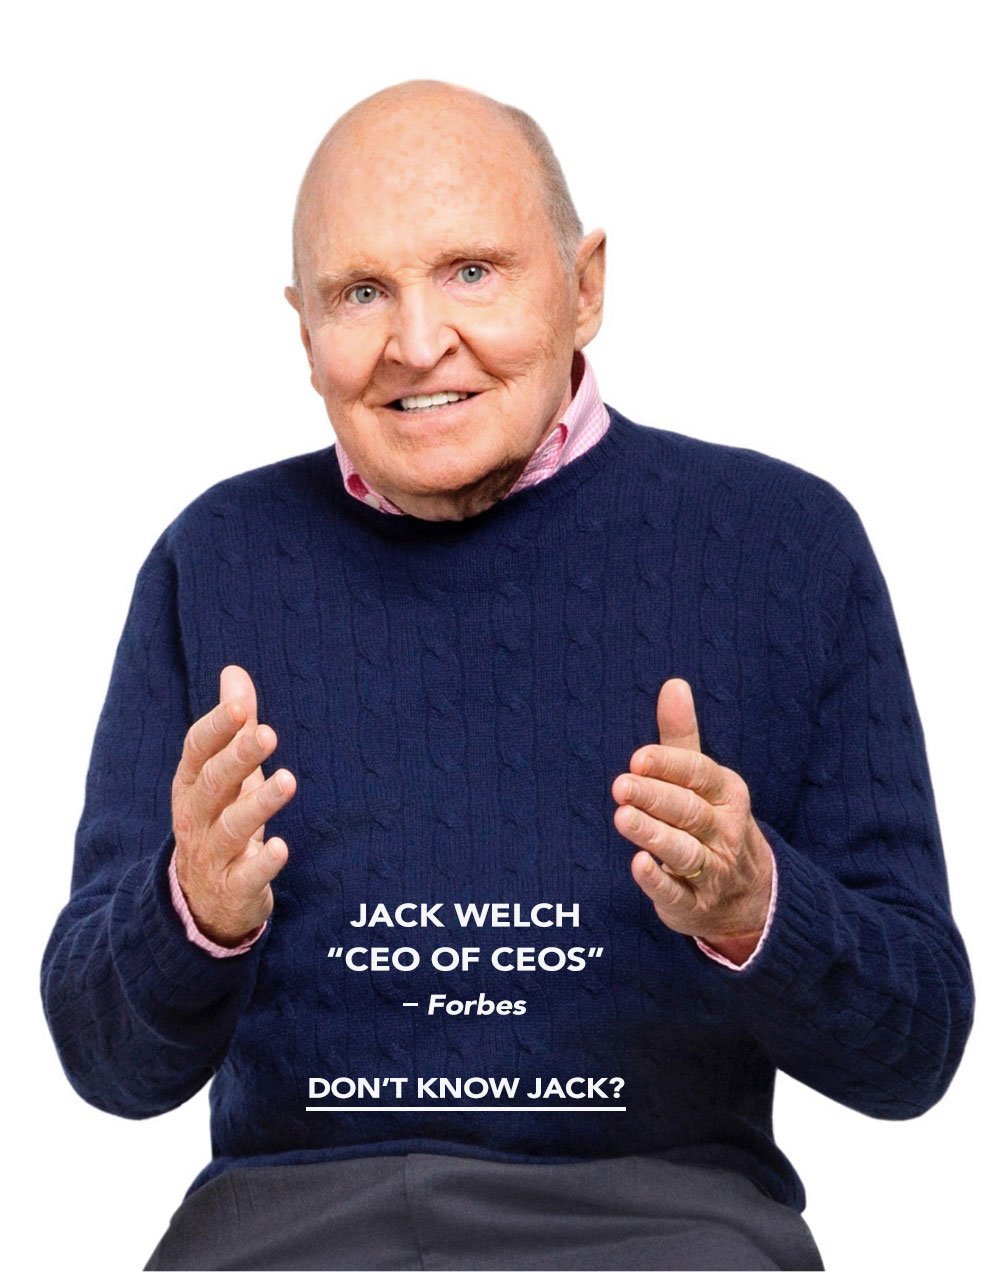 Learn more about Jack Welch